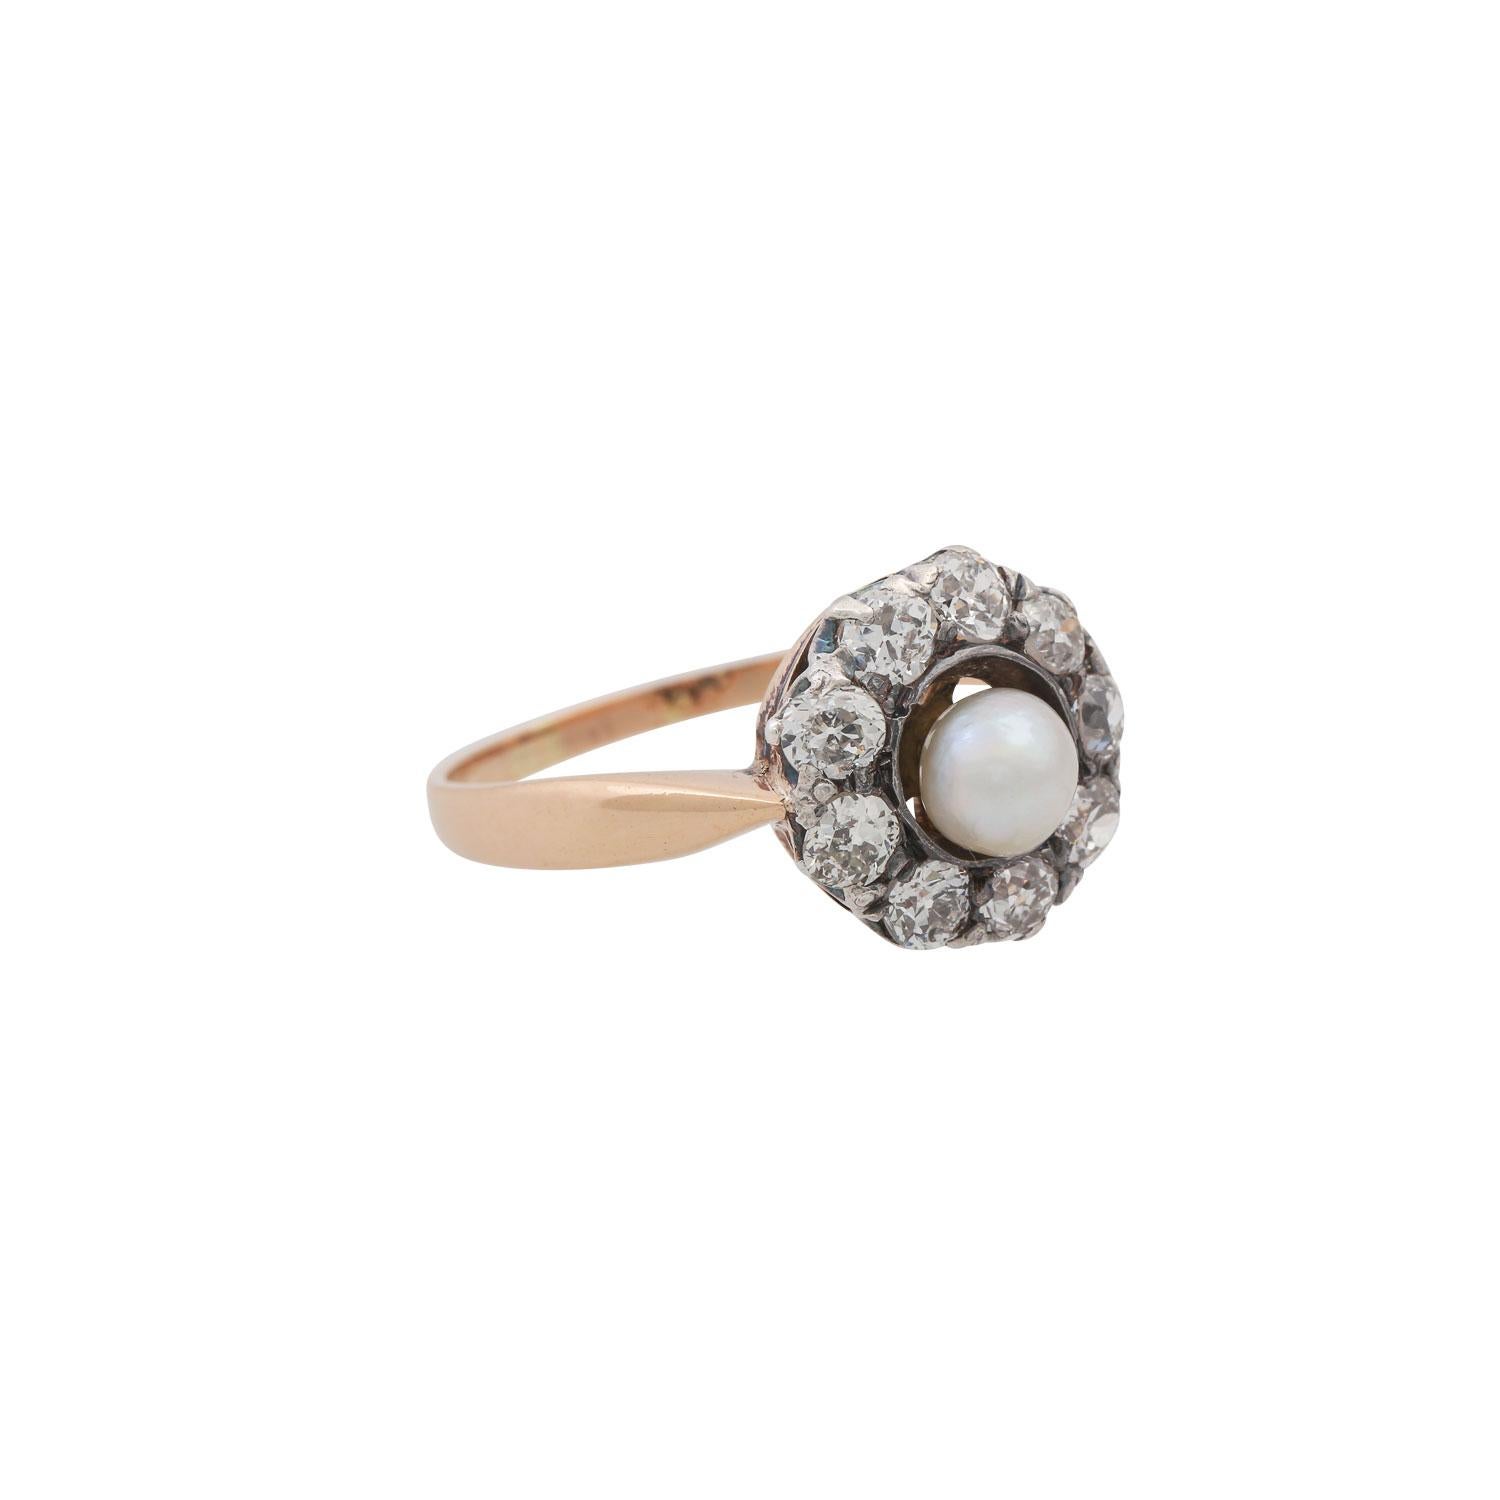 0.9 ct in total, approx. WHITE (H)/SI-P1, pearl approx. 5 mm, RSG 14K, front silver, 3.1 g, RW: 59/19, around 1900, signs of wear.<

 Ring with pearl of approx. 5 mm and old-European-cut diamonds totaling approx. 0.9 ct, approx. WHITE (H)/SI-I1, 14K